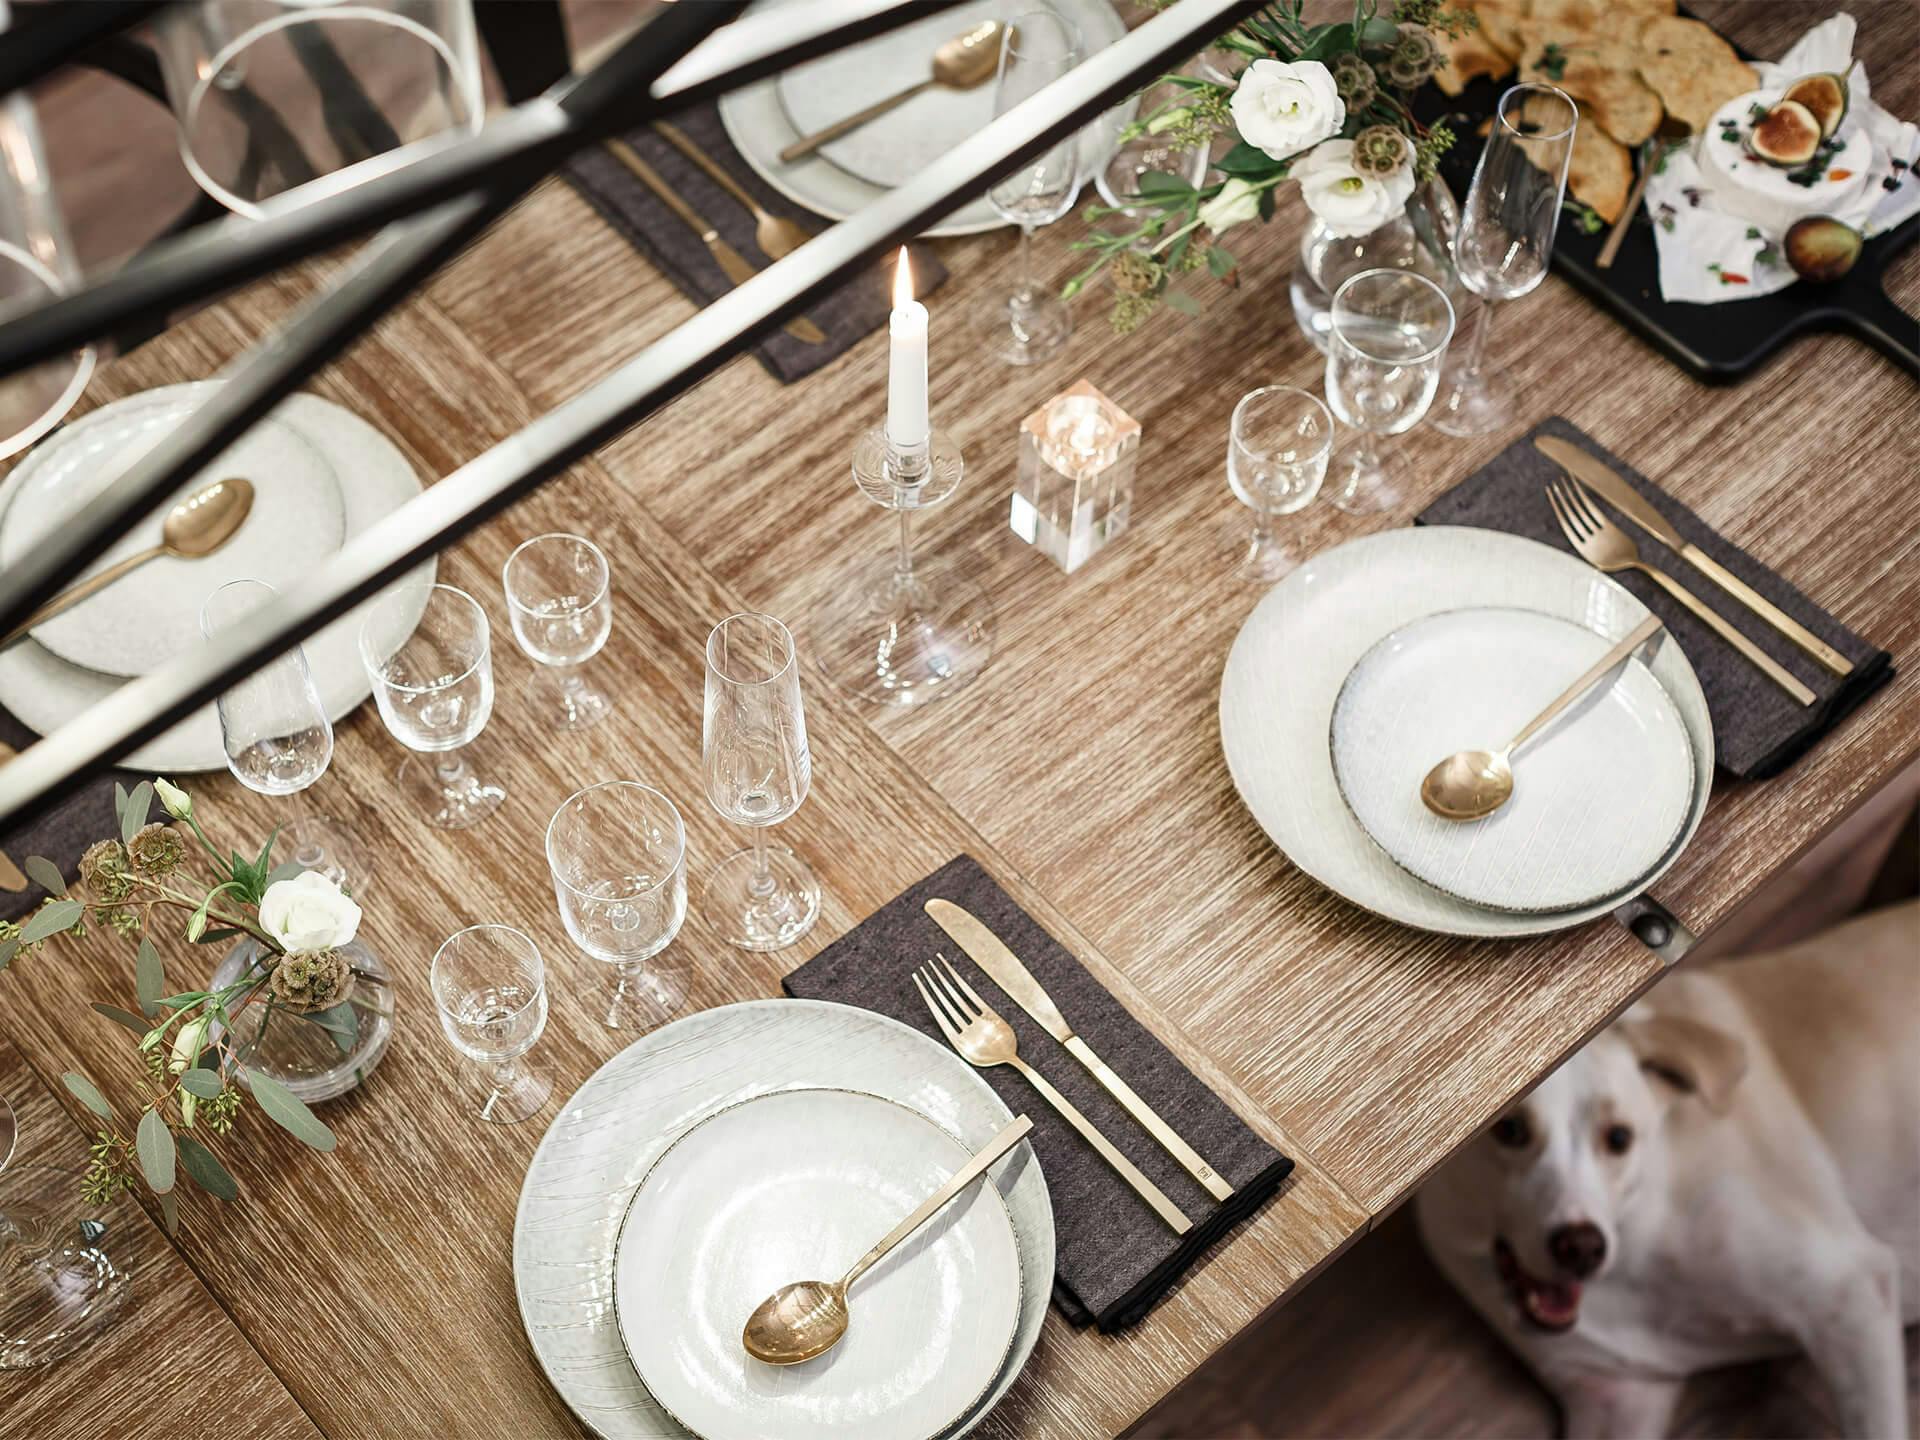 Lifestyle image of a wooden dinning room table that has been set with silverware and plates for a dinner